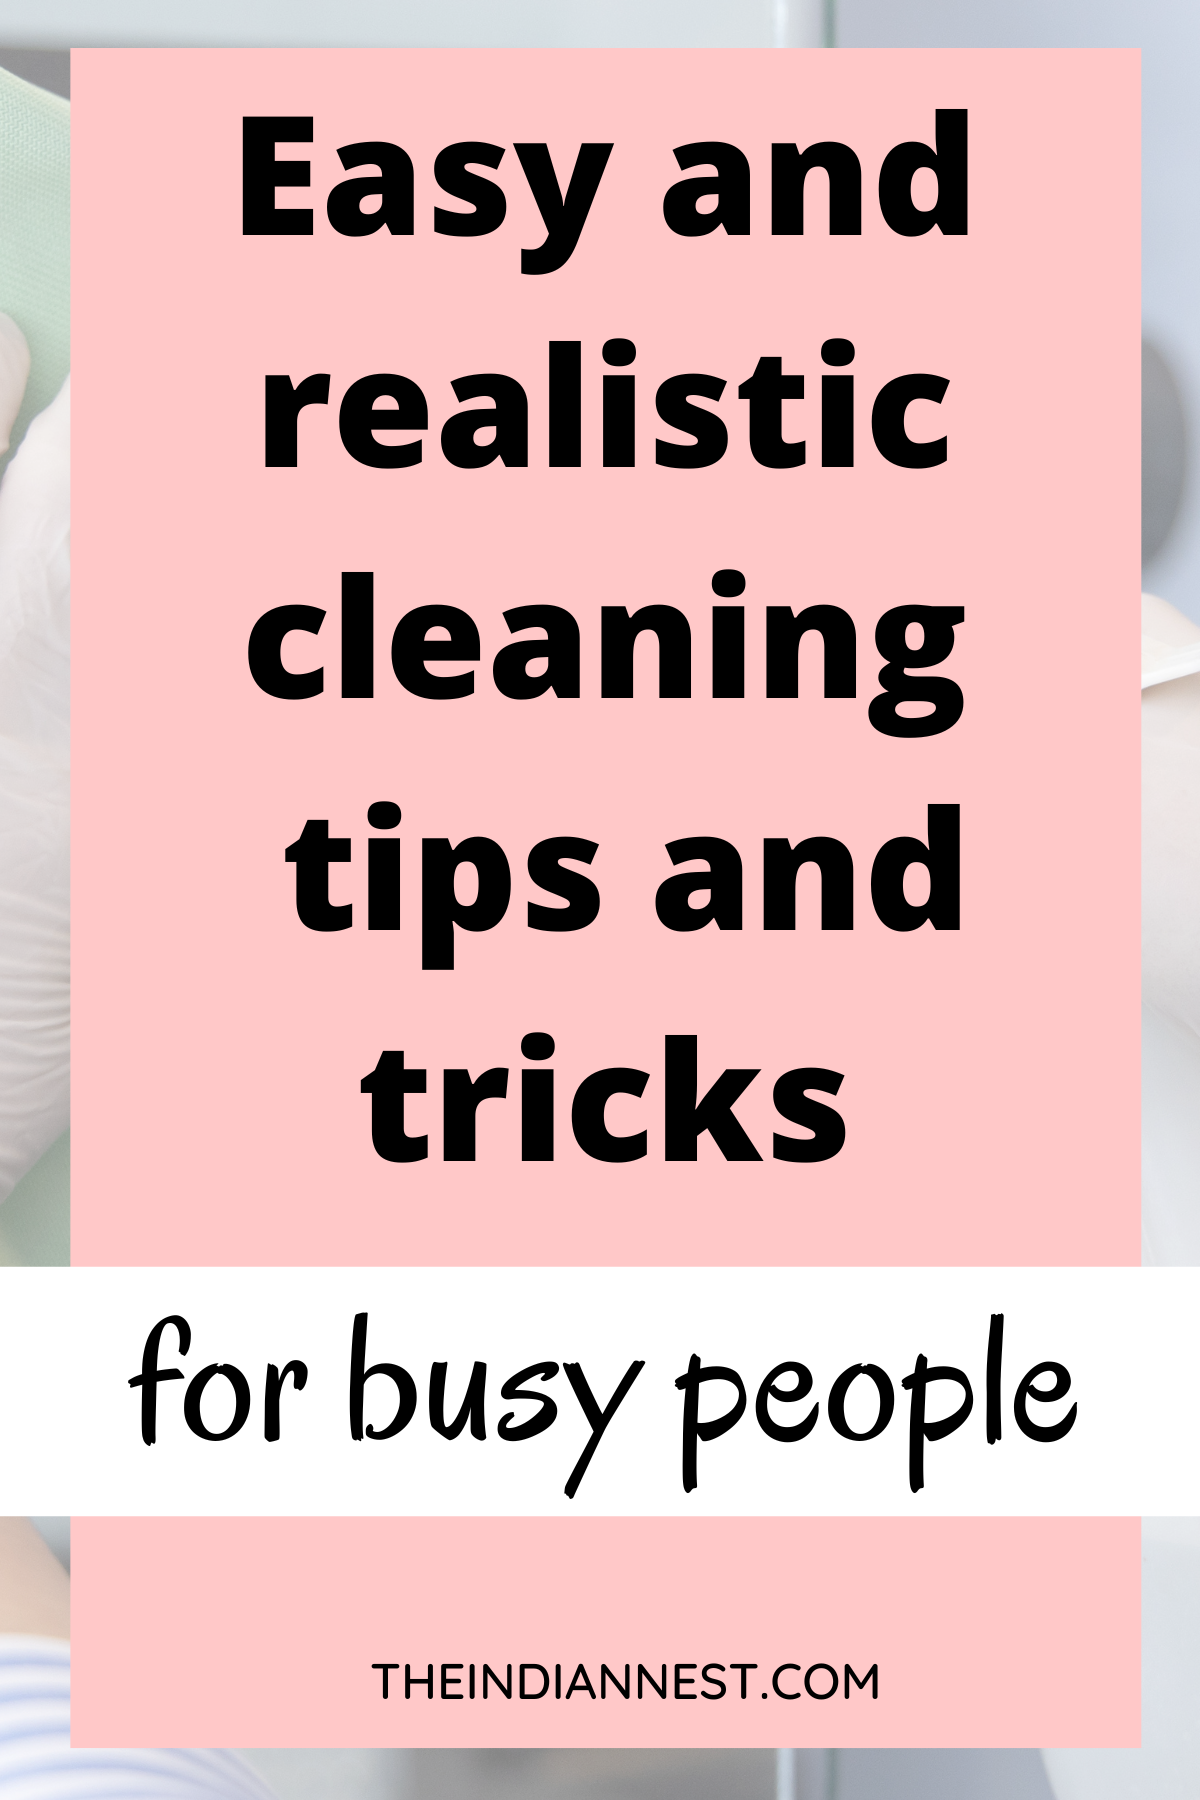 Here you'll learn how to create a realistic cleaning schedule that works for you, along with some tips and cleaning schedules to help you get it done without driving yourself crazy